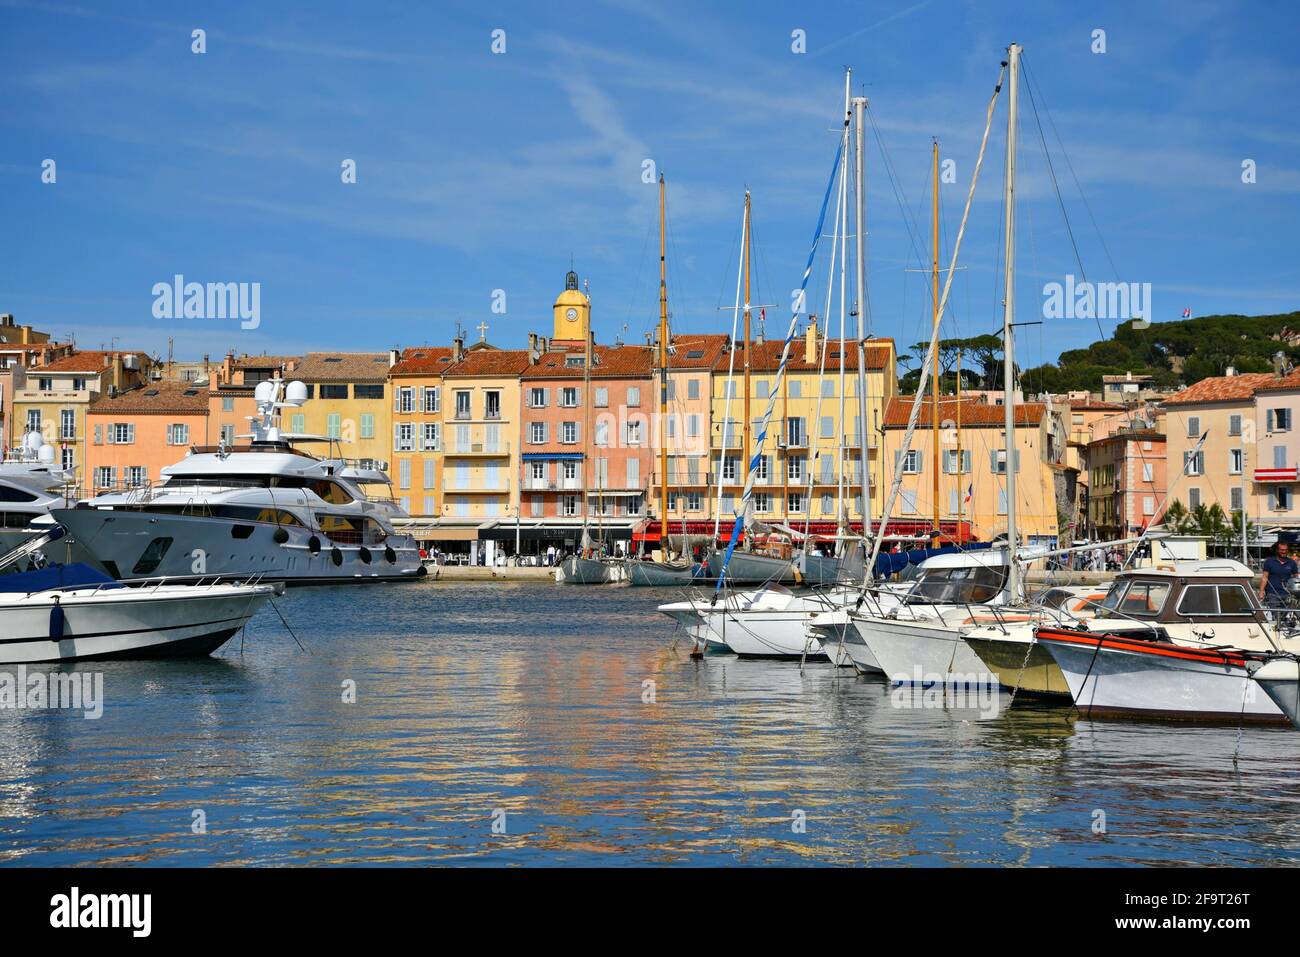 Scenic view of the Old Port with the typical Provençal architecture and luxury sail boats in Saint-Tropez, French Riviera France. Stock Photo